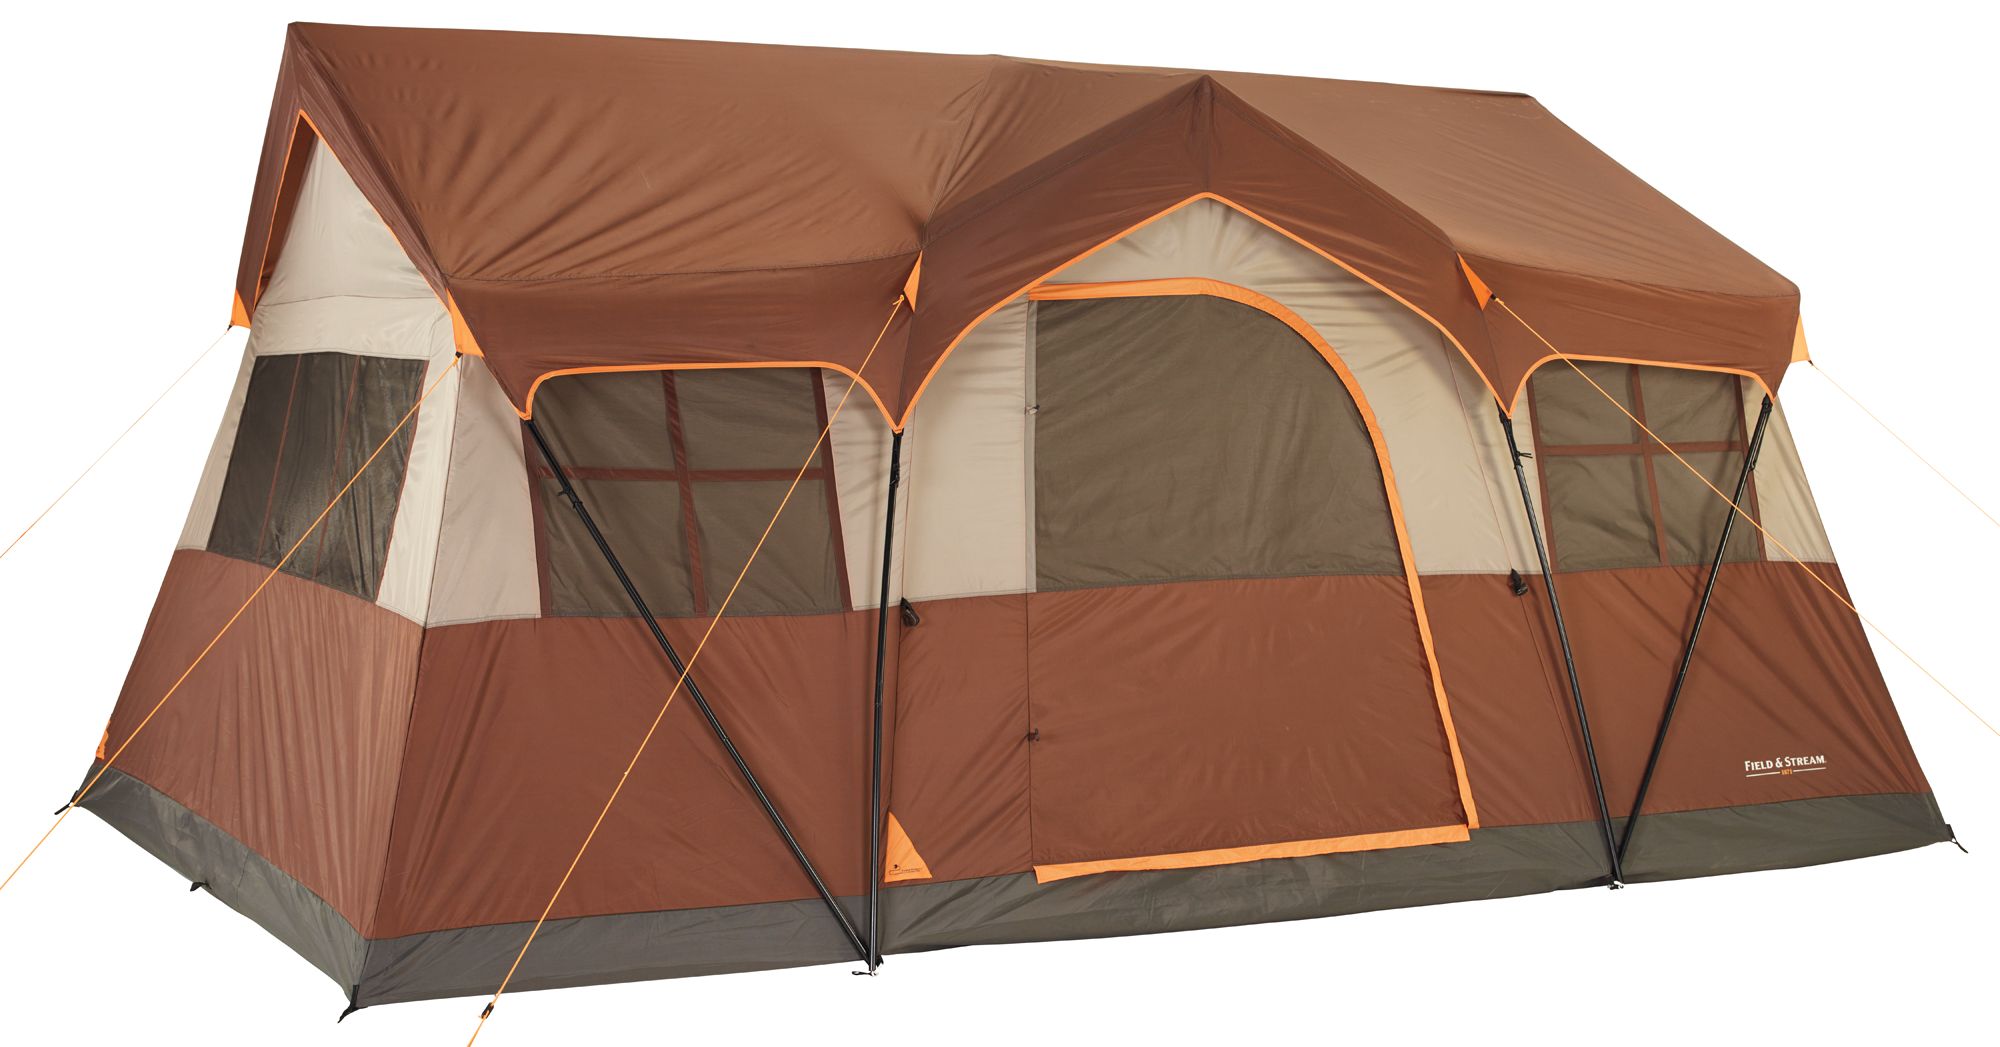 Cabin Tents | Best Price Guarantee at 